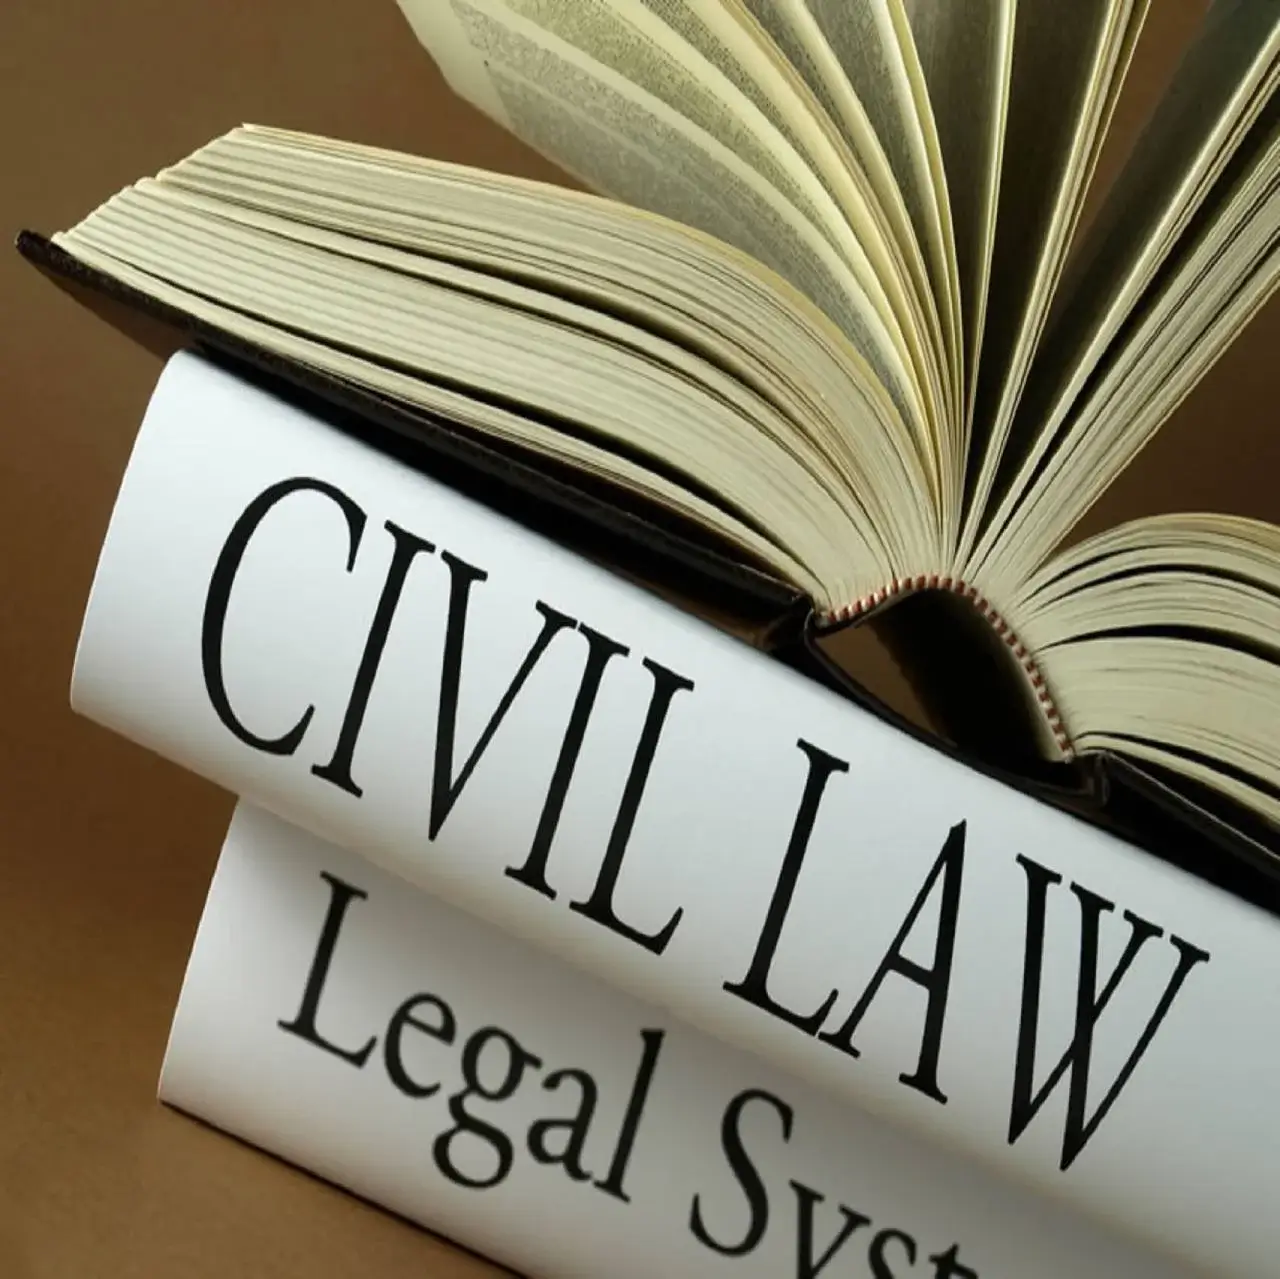 Recovery case or Civil recovery case